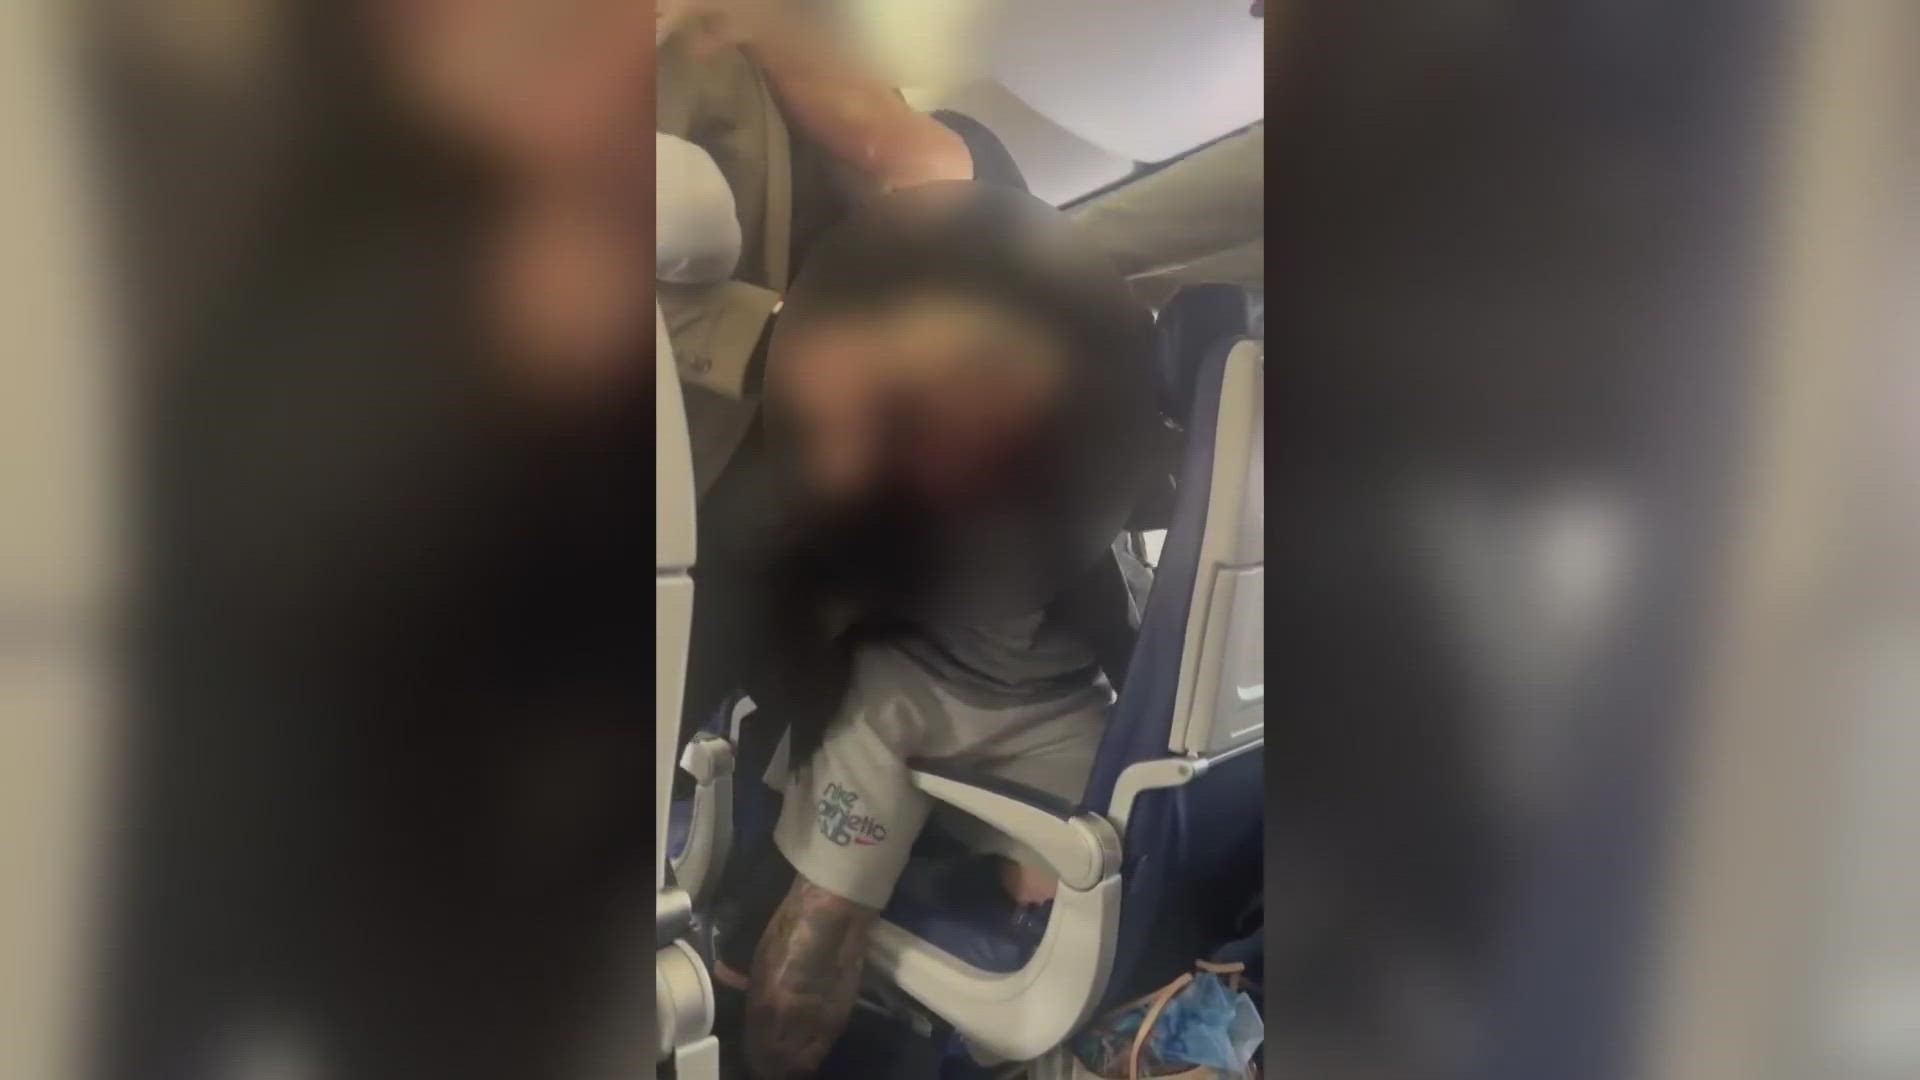 A fight broke out on a Southwest Airlines flight out of Dallas on Monday, and the incident was captured on video.